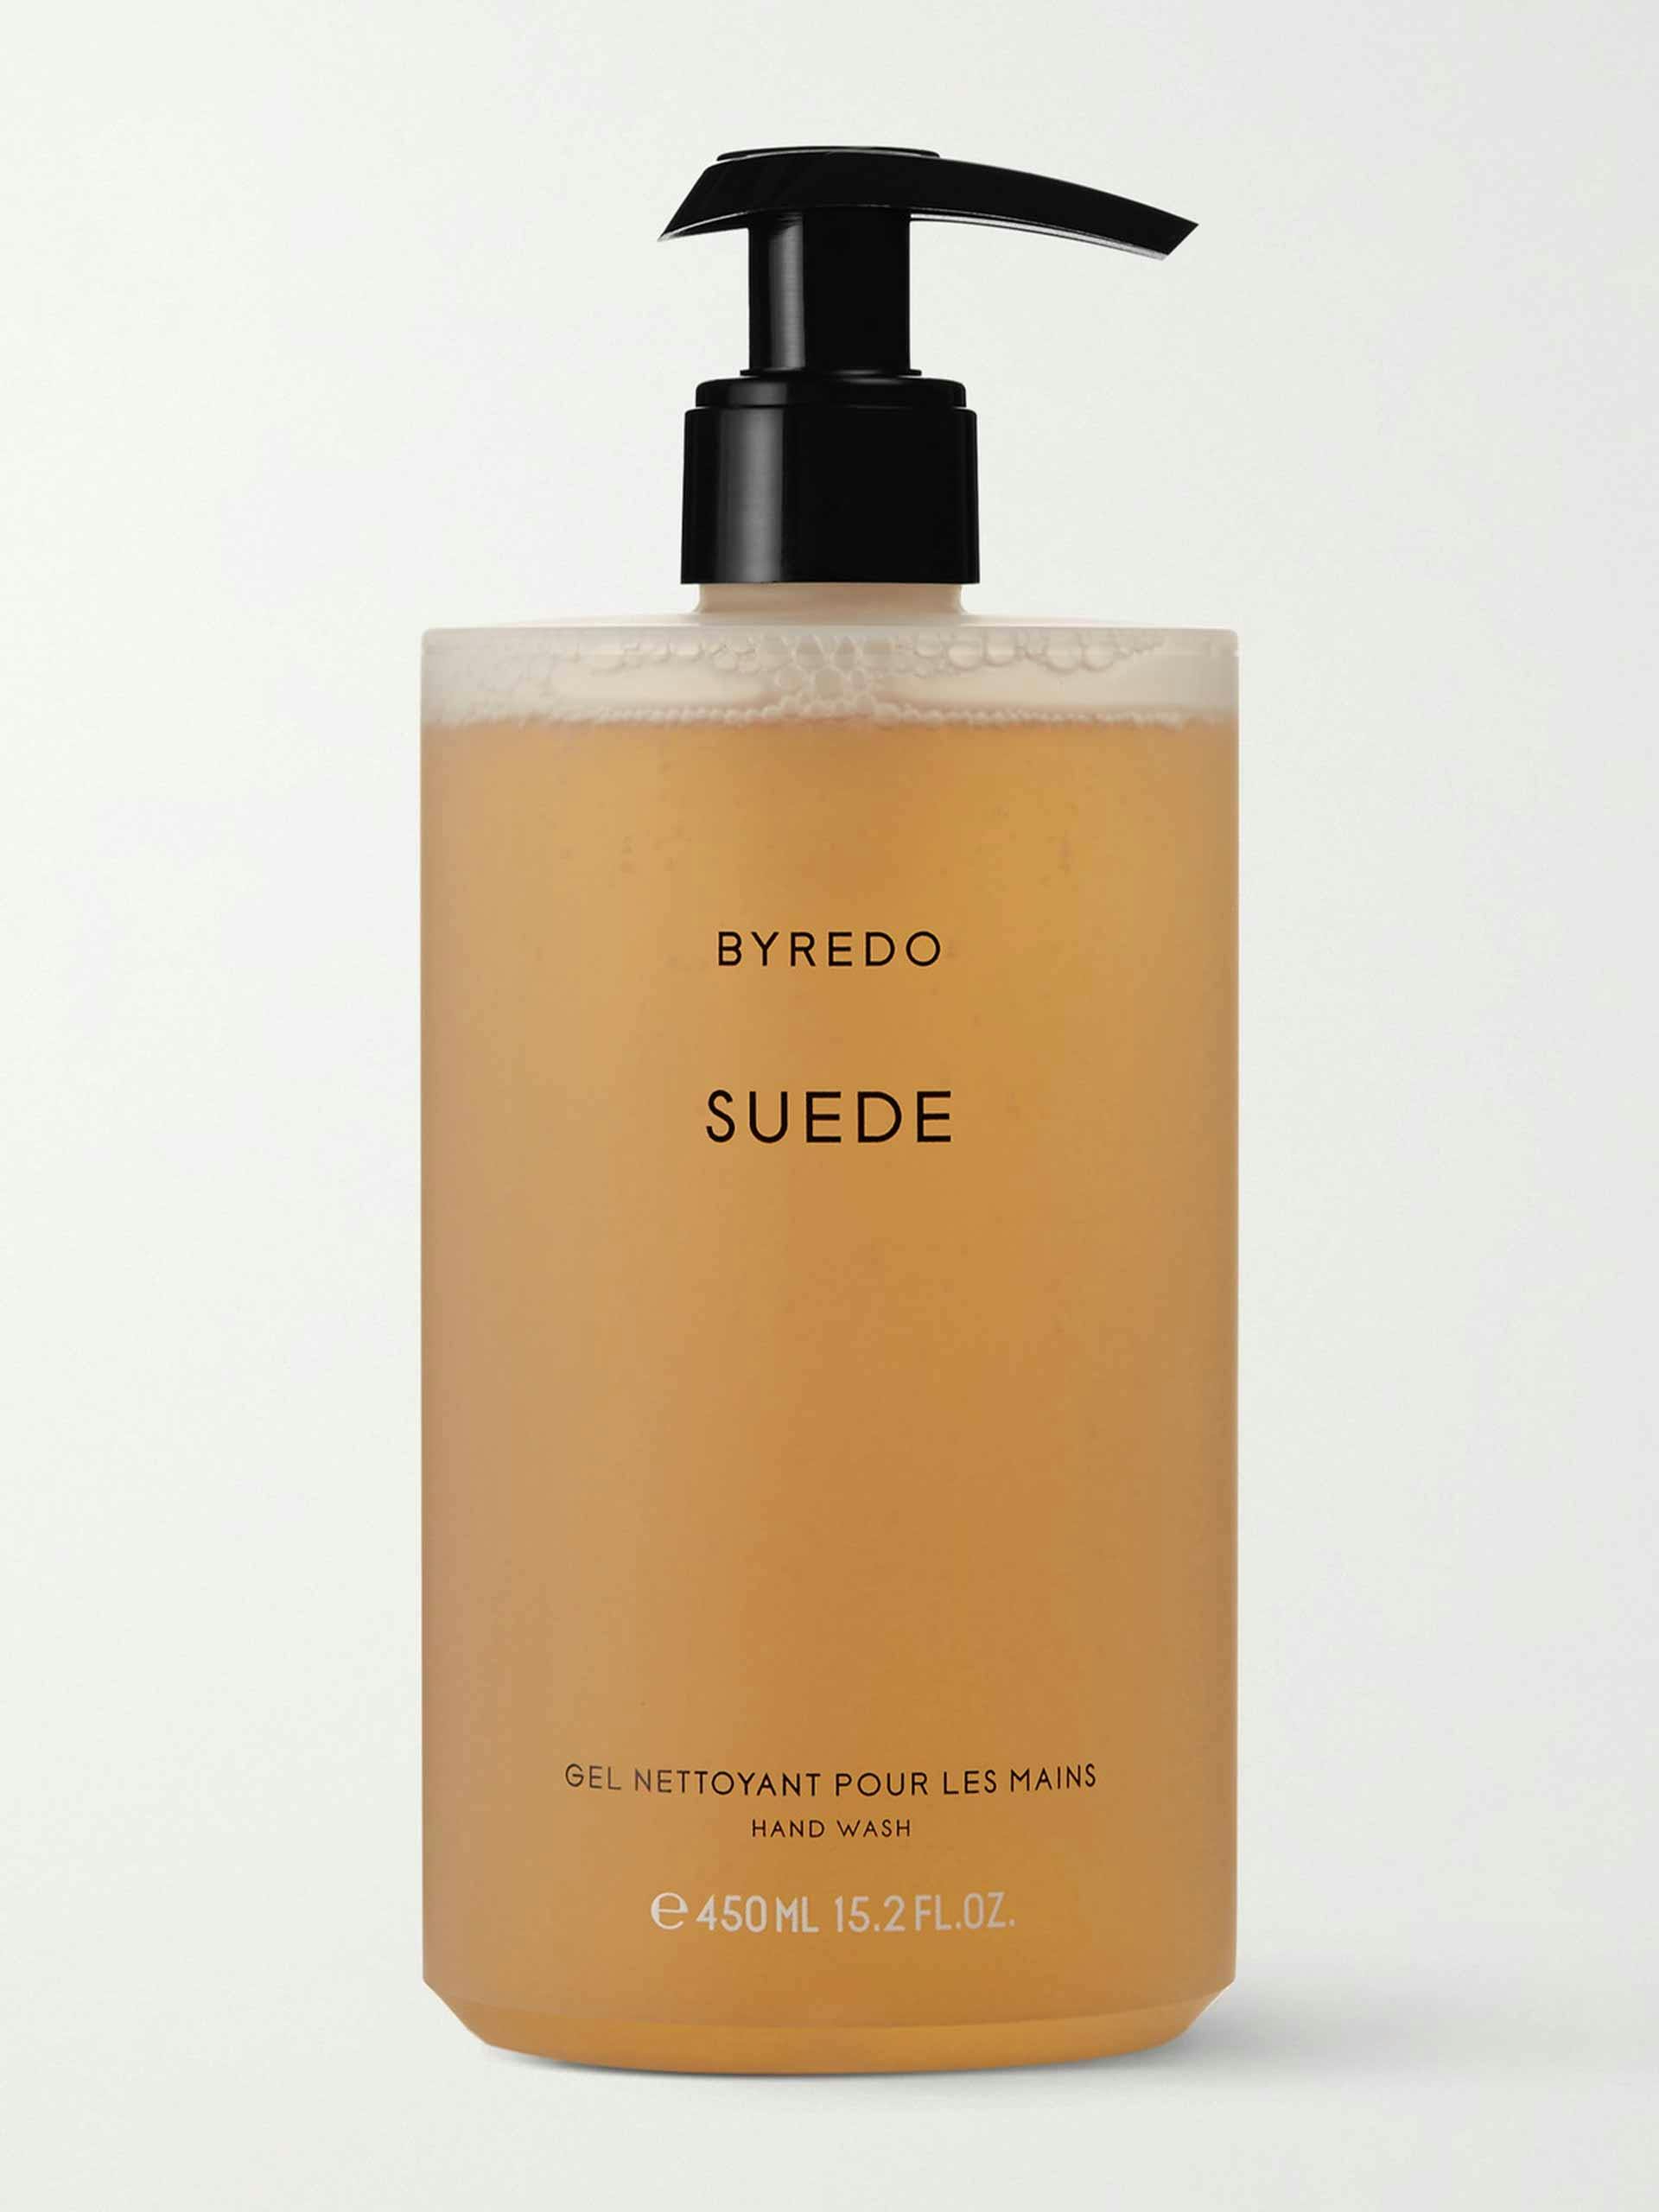 Suede scented hand wash